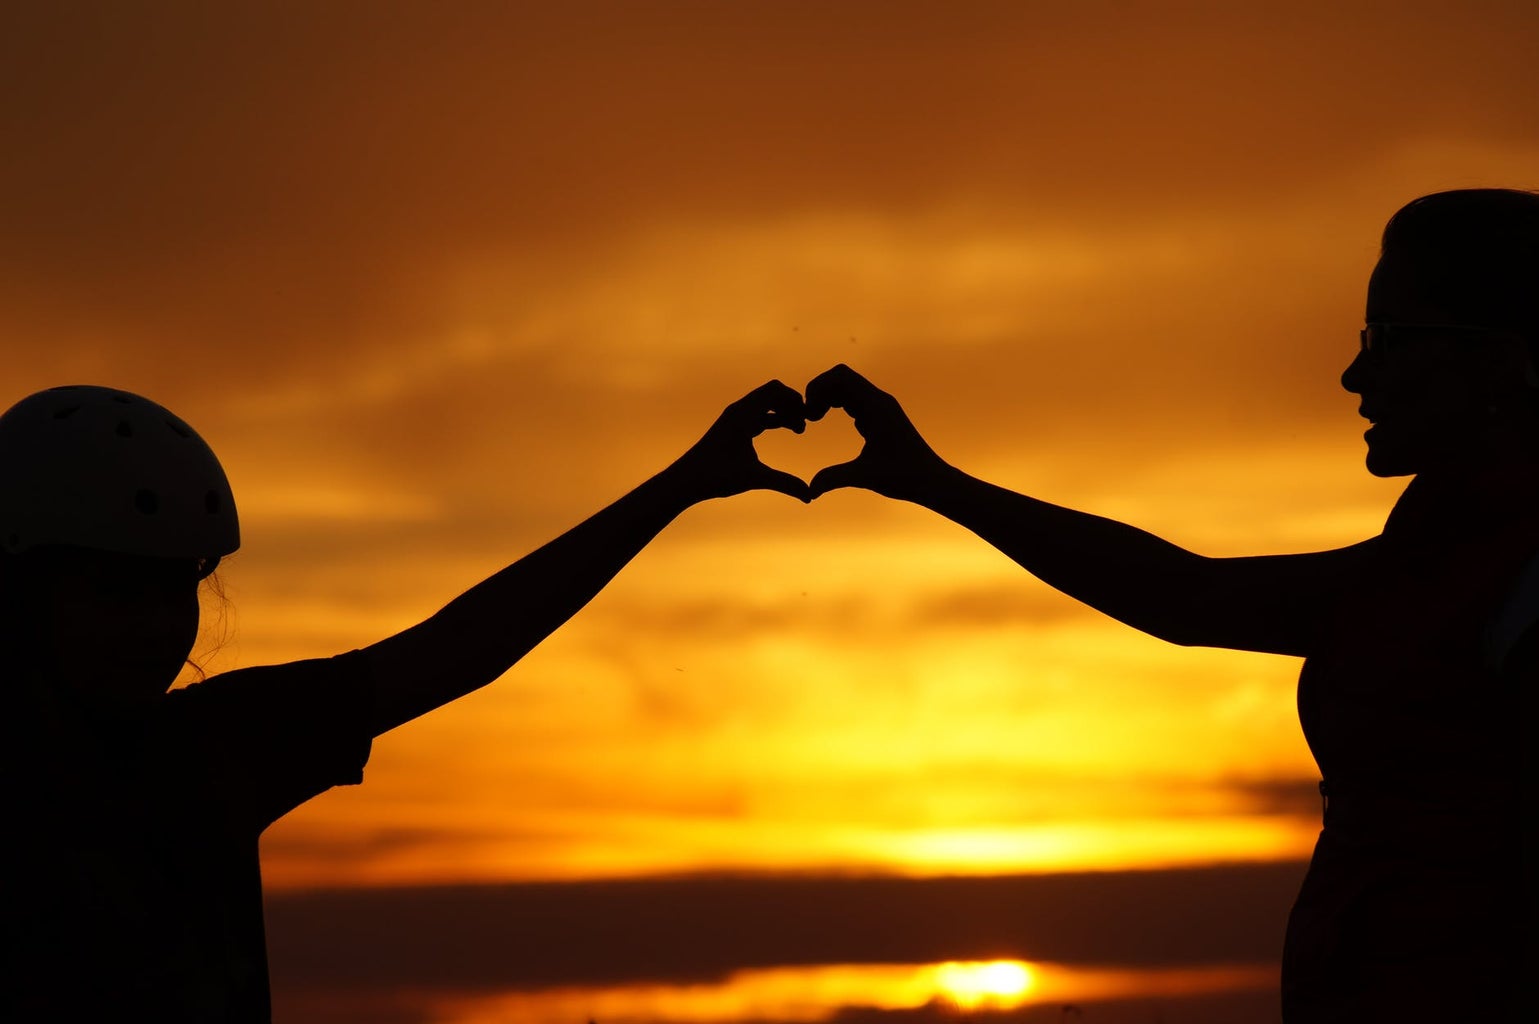 Two people holding hands in heart shape during sunset